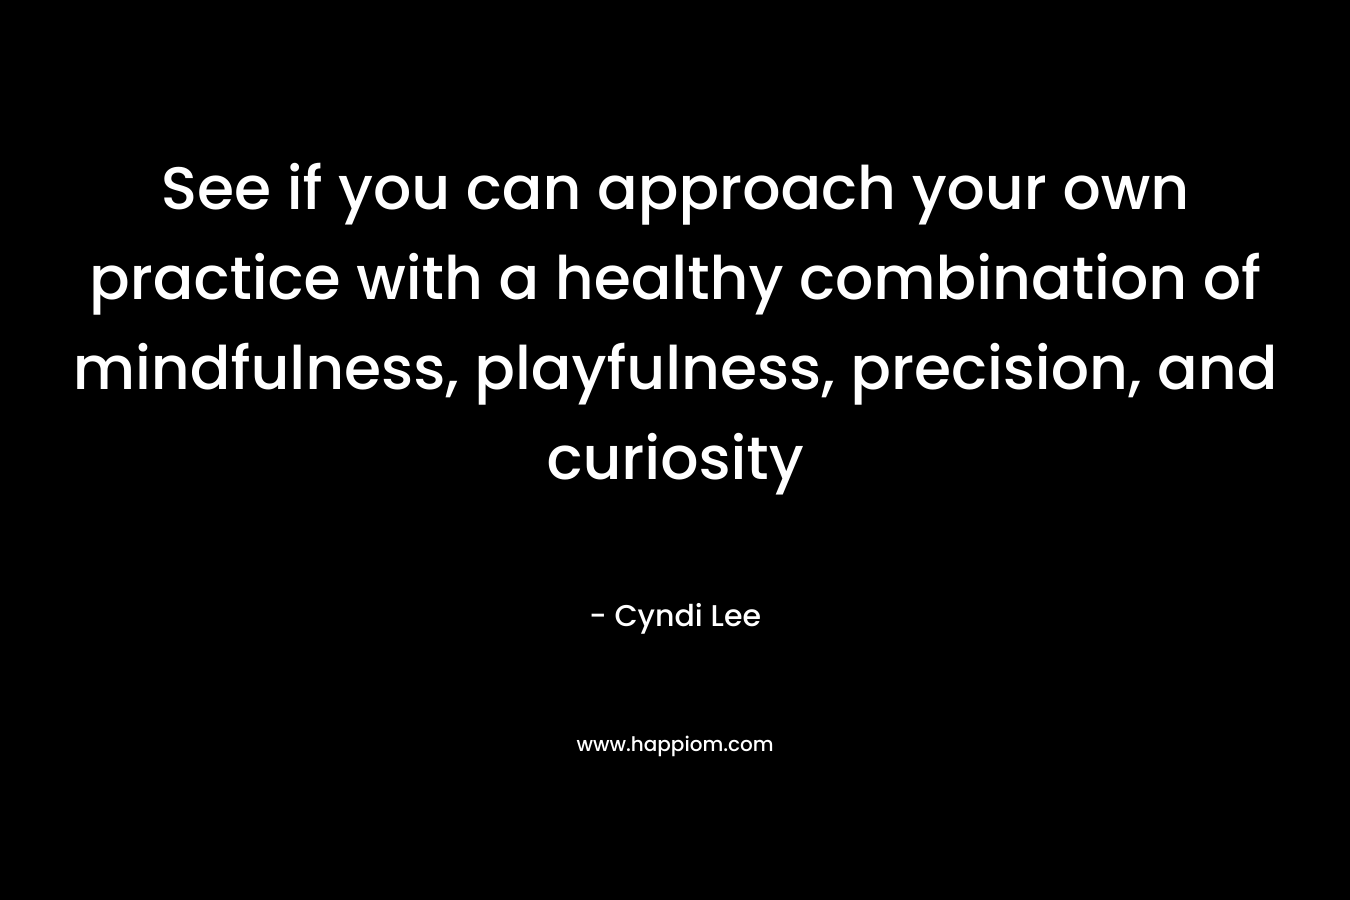 See if you can approach your own practice with a healthy combination of mindfulness, playfulness, precision, and curiosity – Cyndi Lee